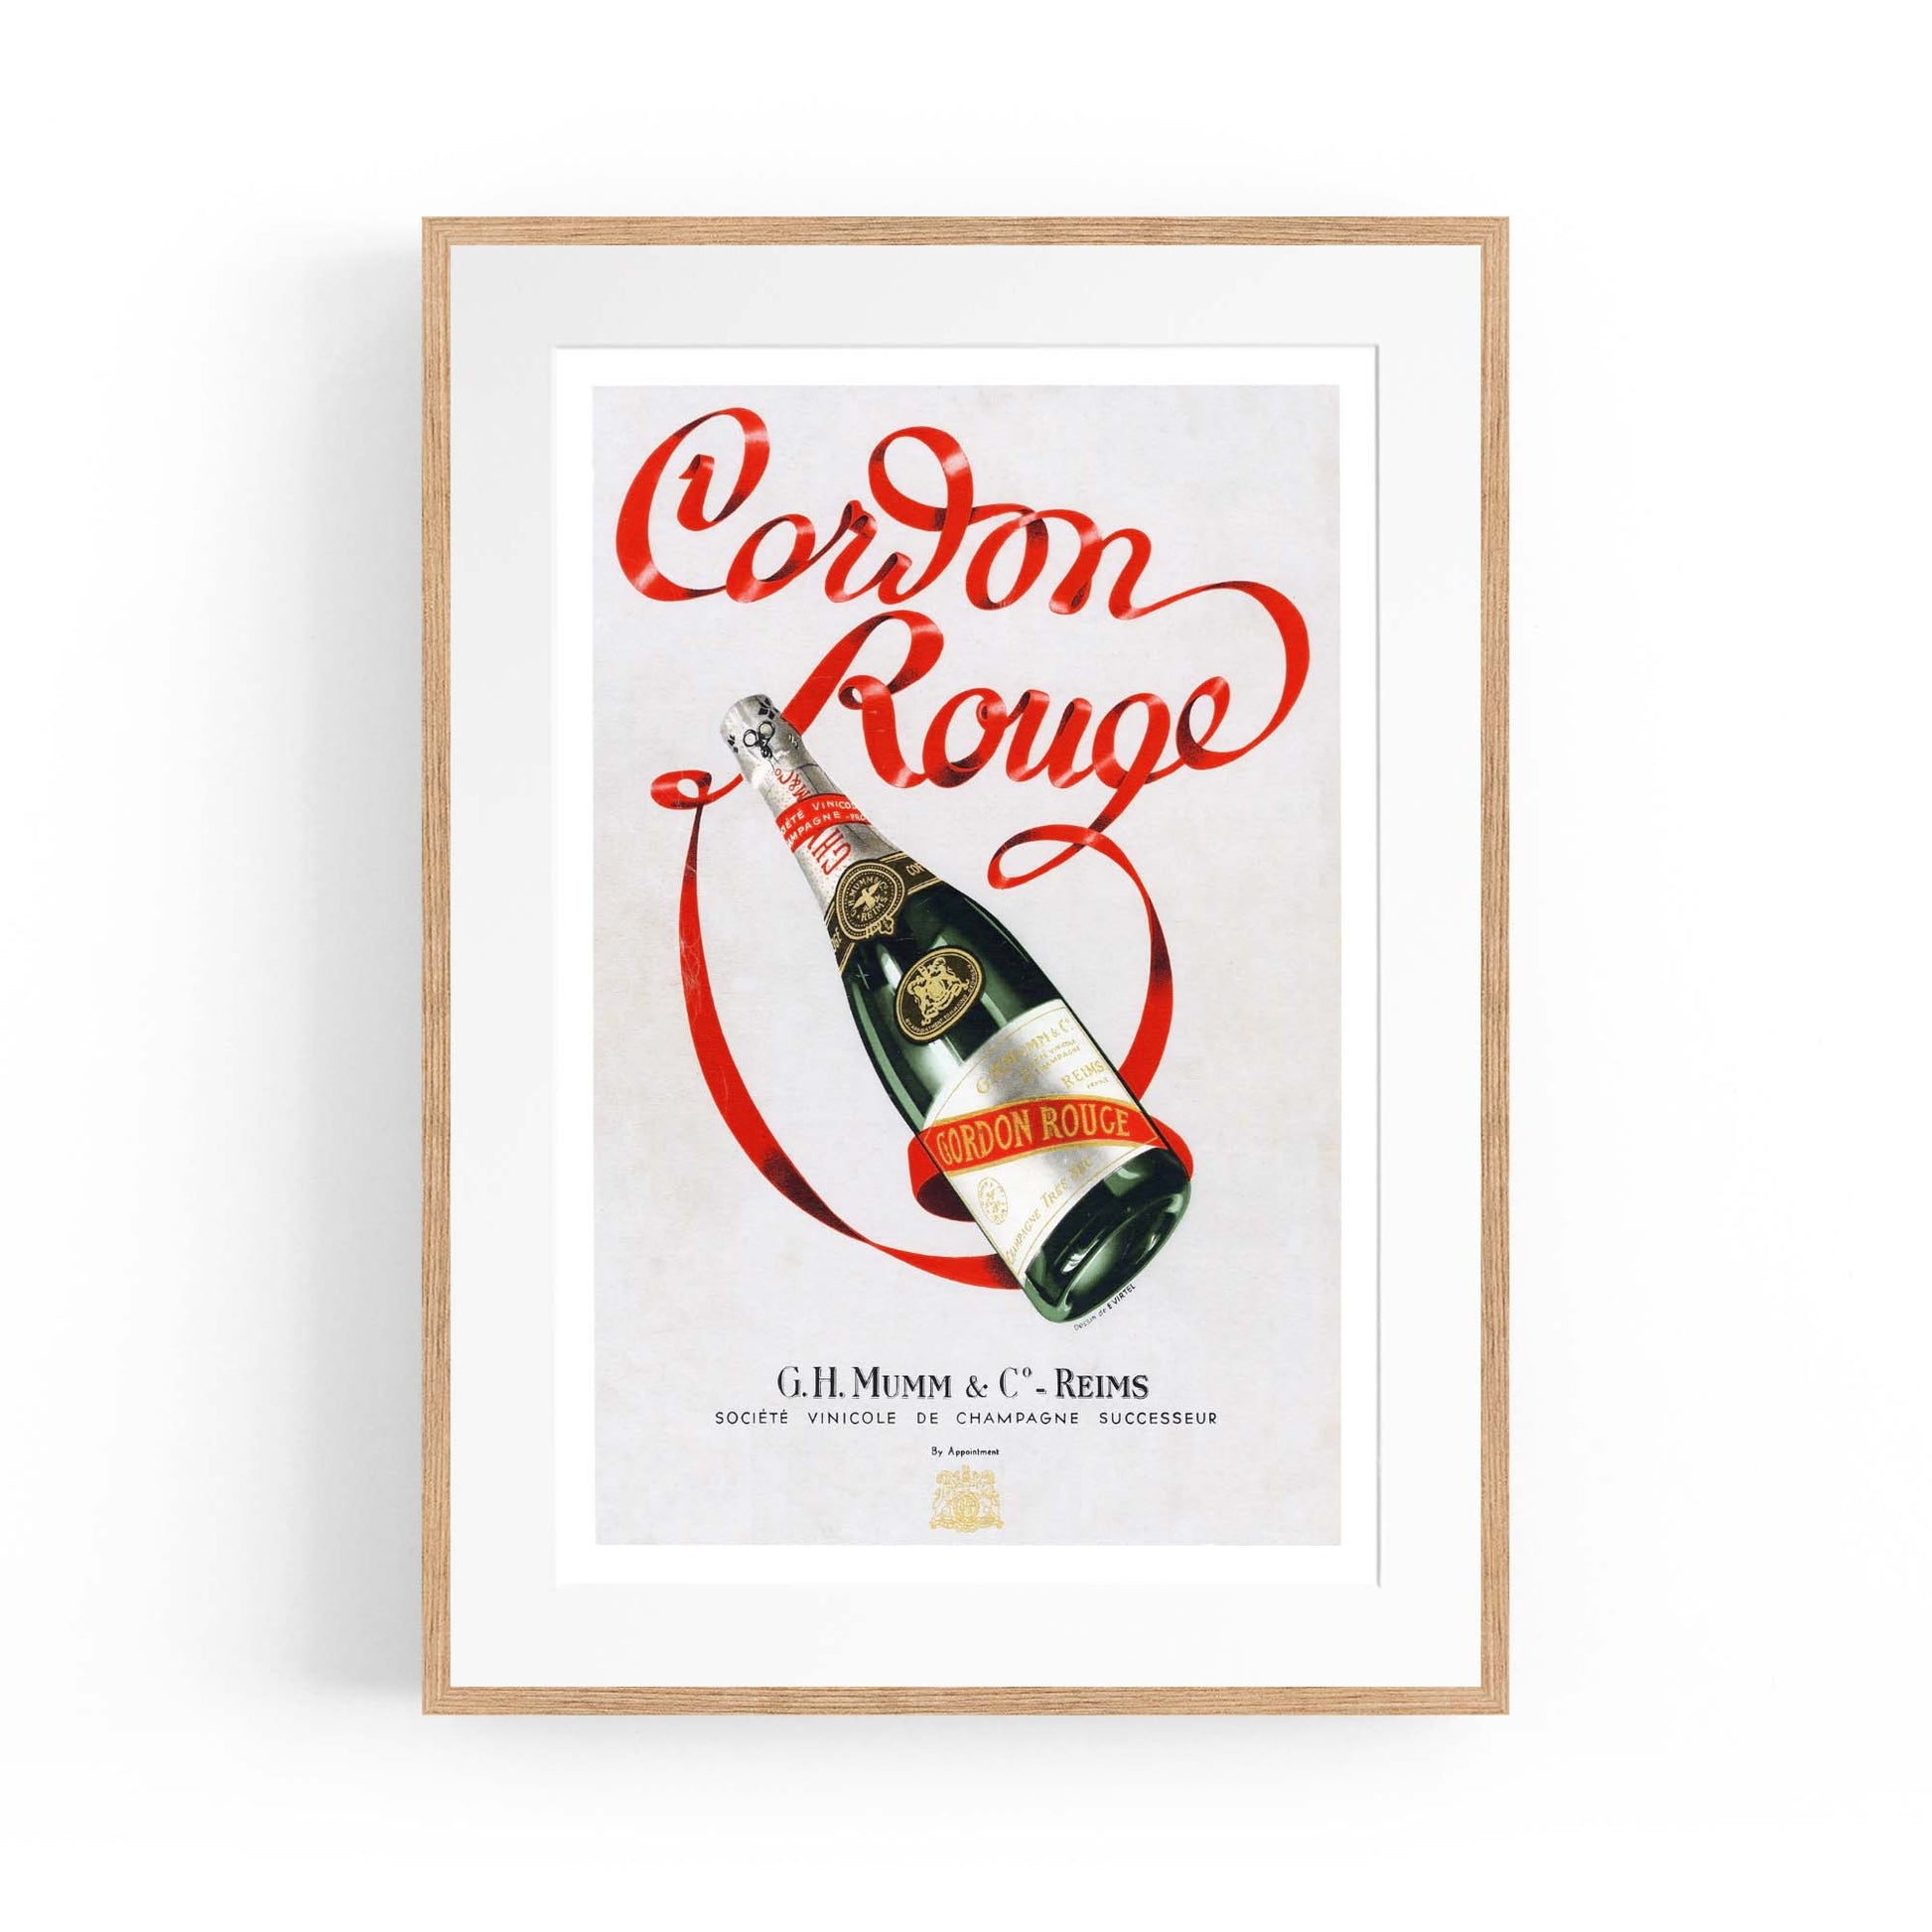 Cordon Rouge Champagne Vintage Drinks Advert Wall Art - The Affordable Art Company